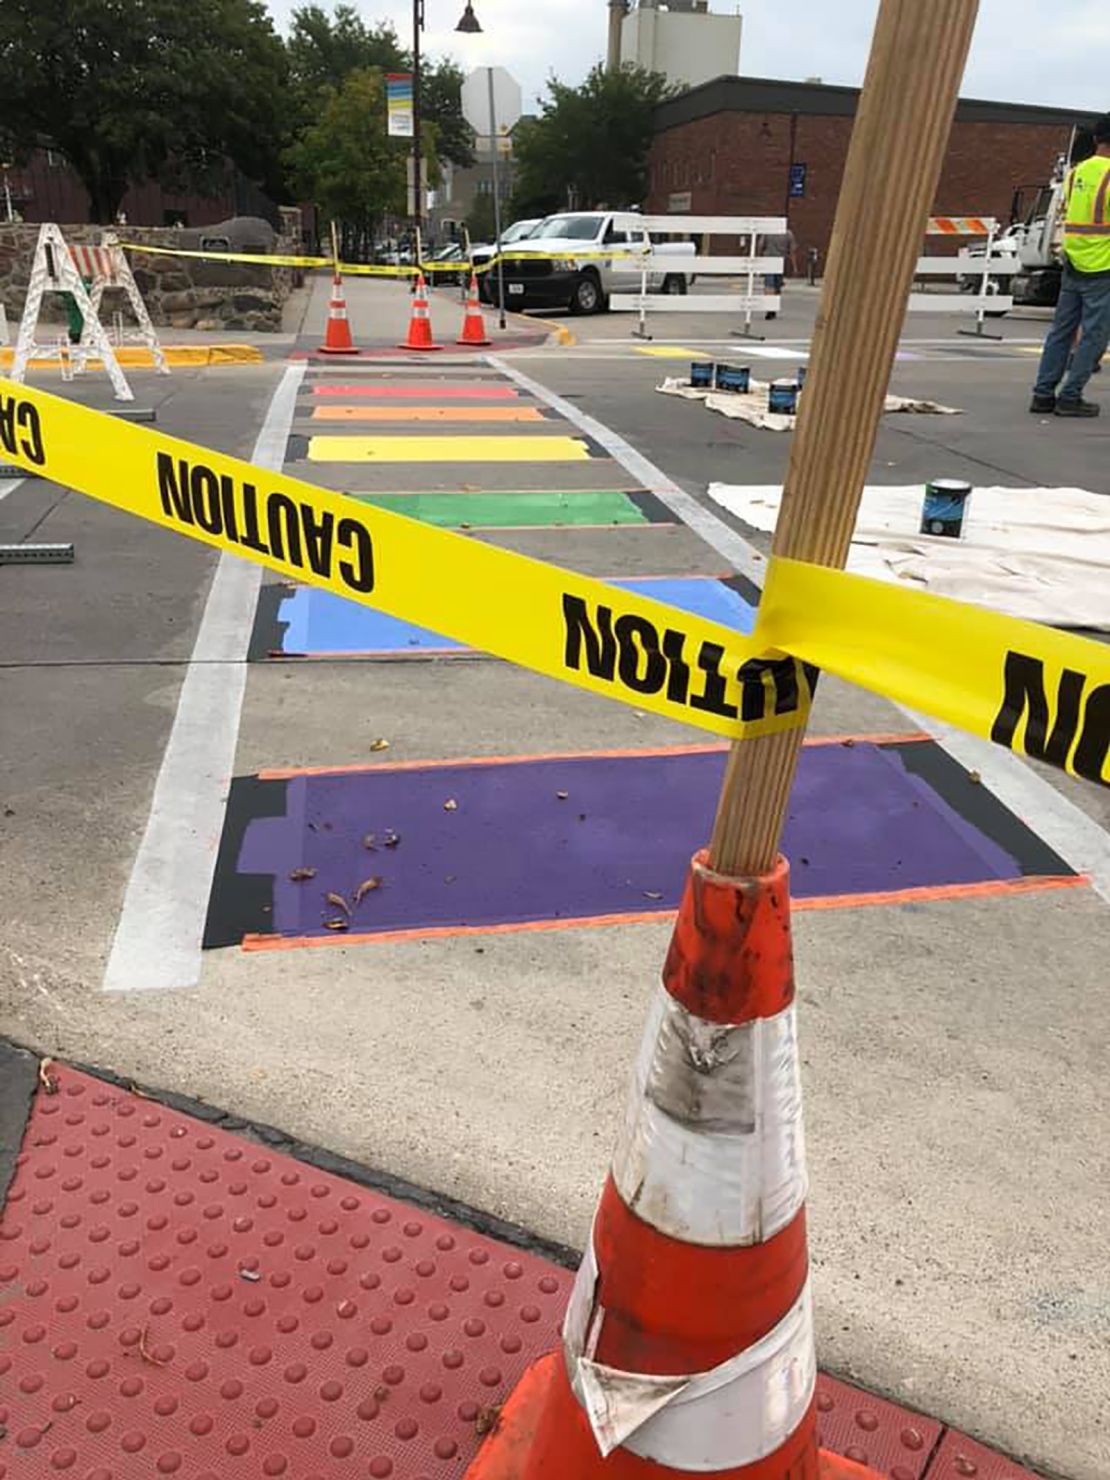 The city of Ames, Iowa, introduced new, inclusive crosswalks at the intersection of Fifth Street and Douglas Avenue on September 4.